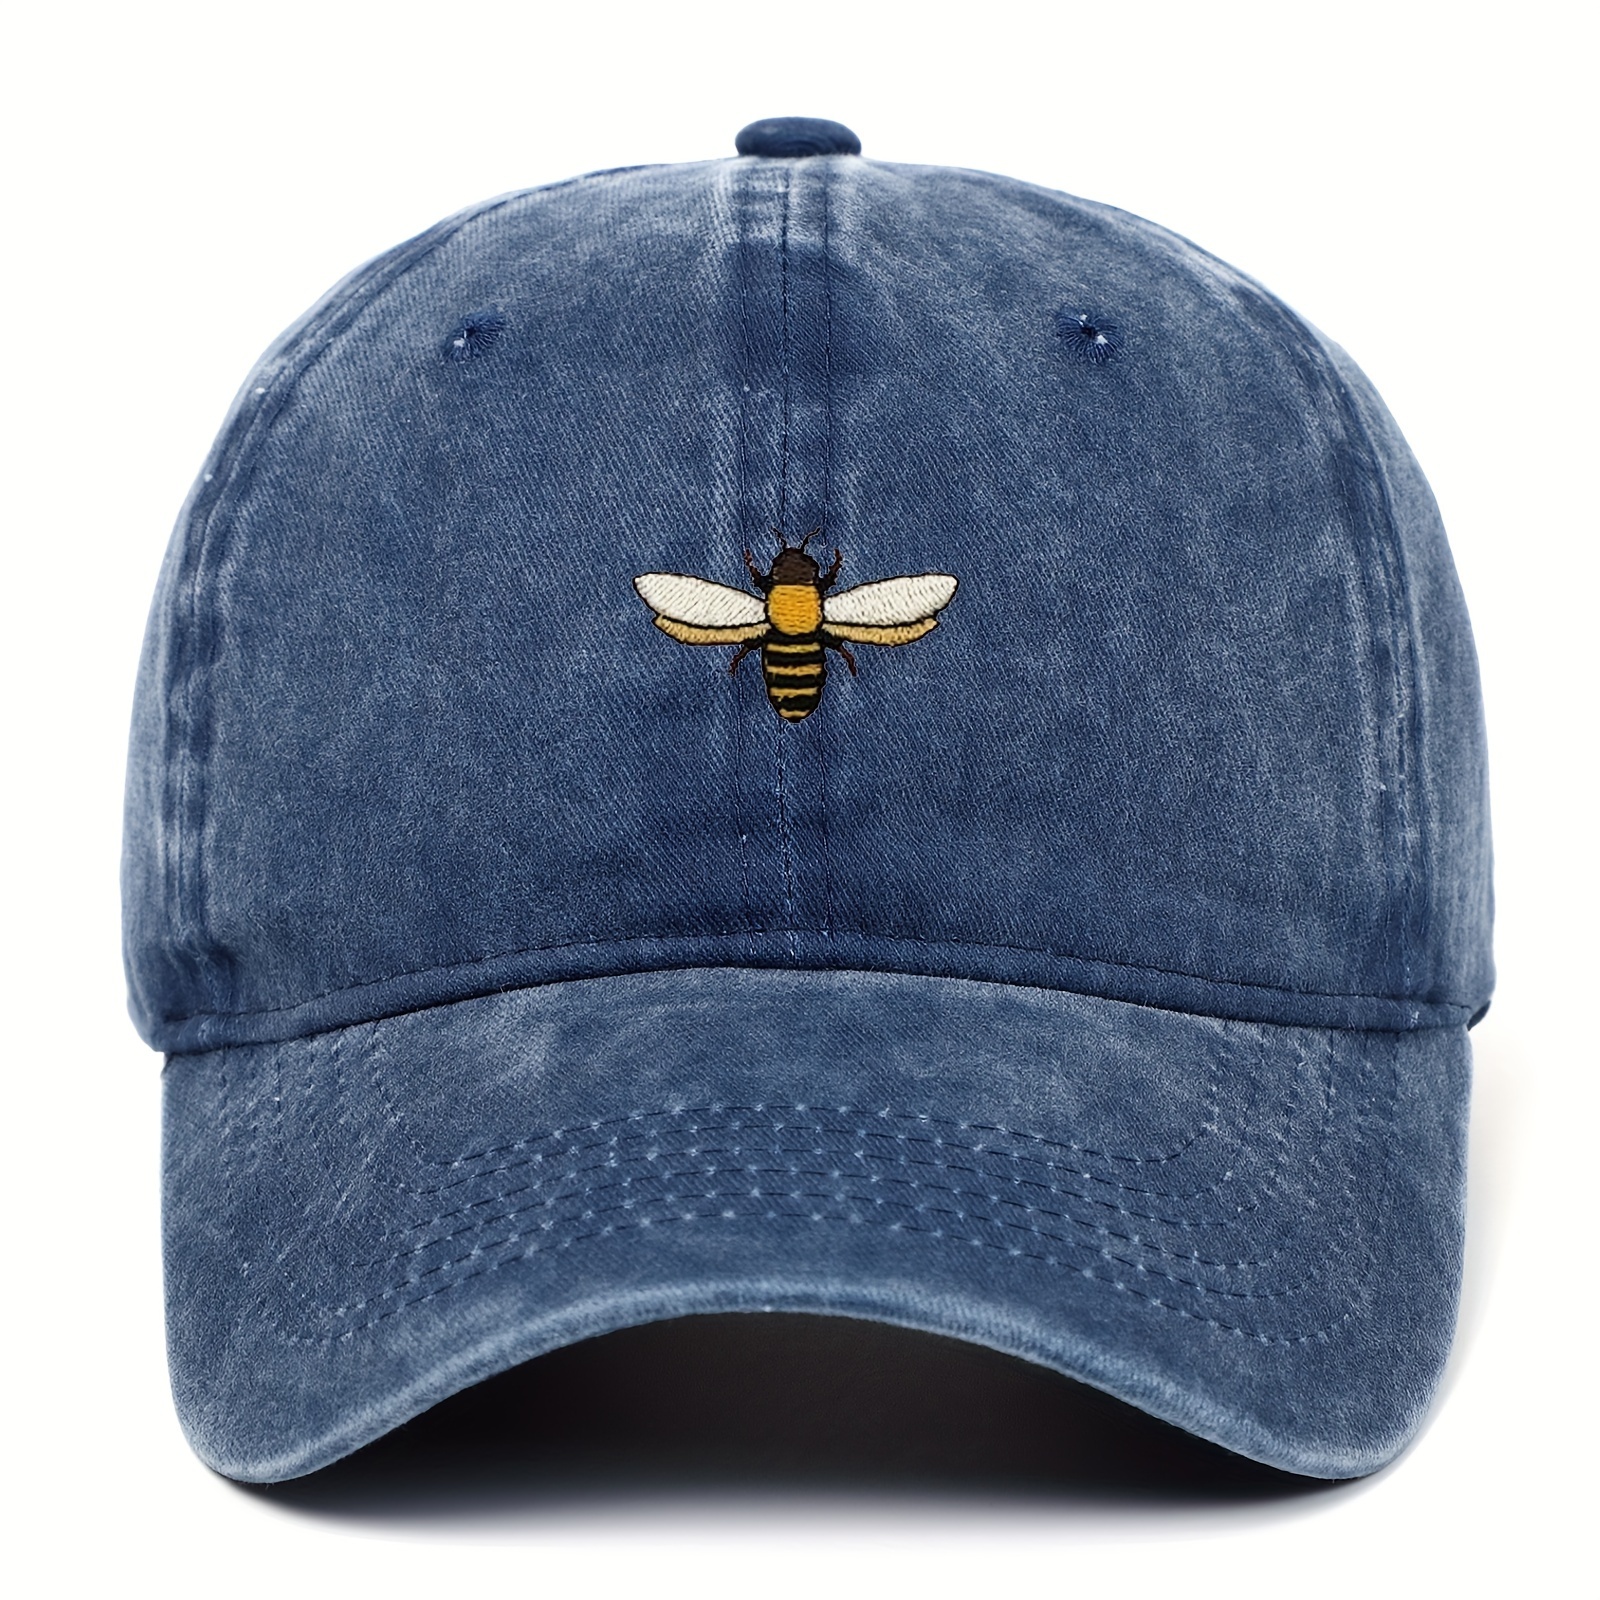 

Adjustable Cotton Baseball Cap With Embroidered Bee Design, Unisex Casual Peaked Hat, Outdoor Sports Cap, Available In Denim Blue, Light Blue, And Pink